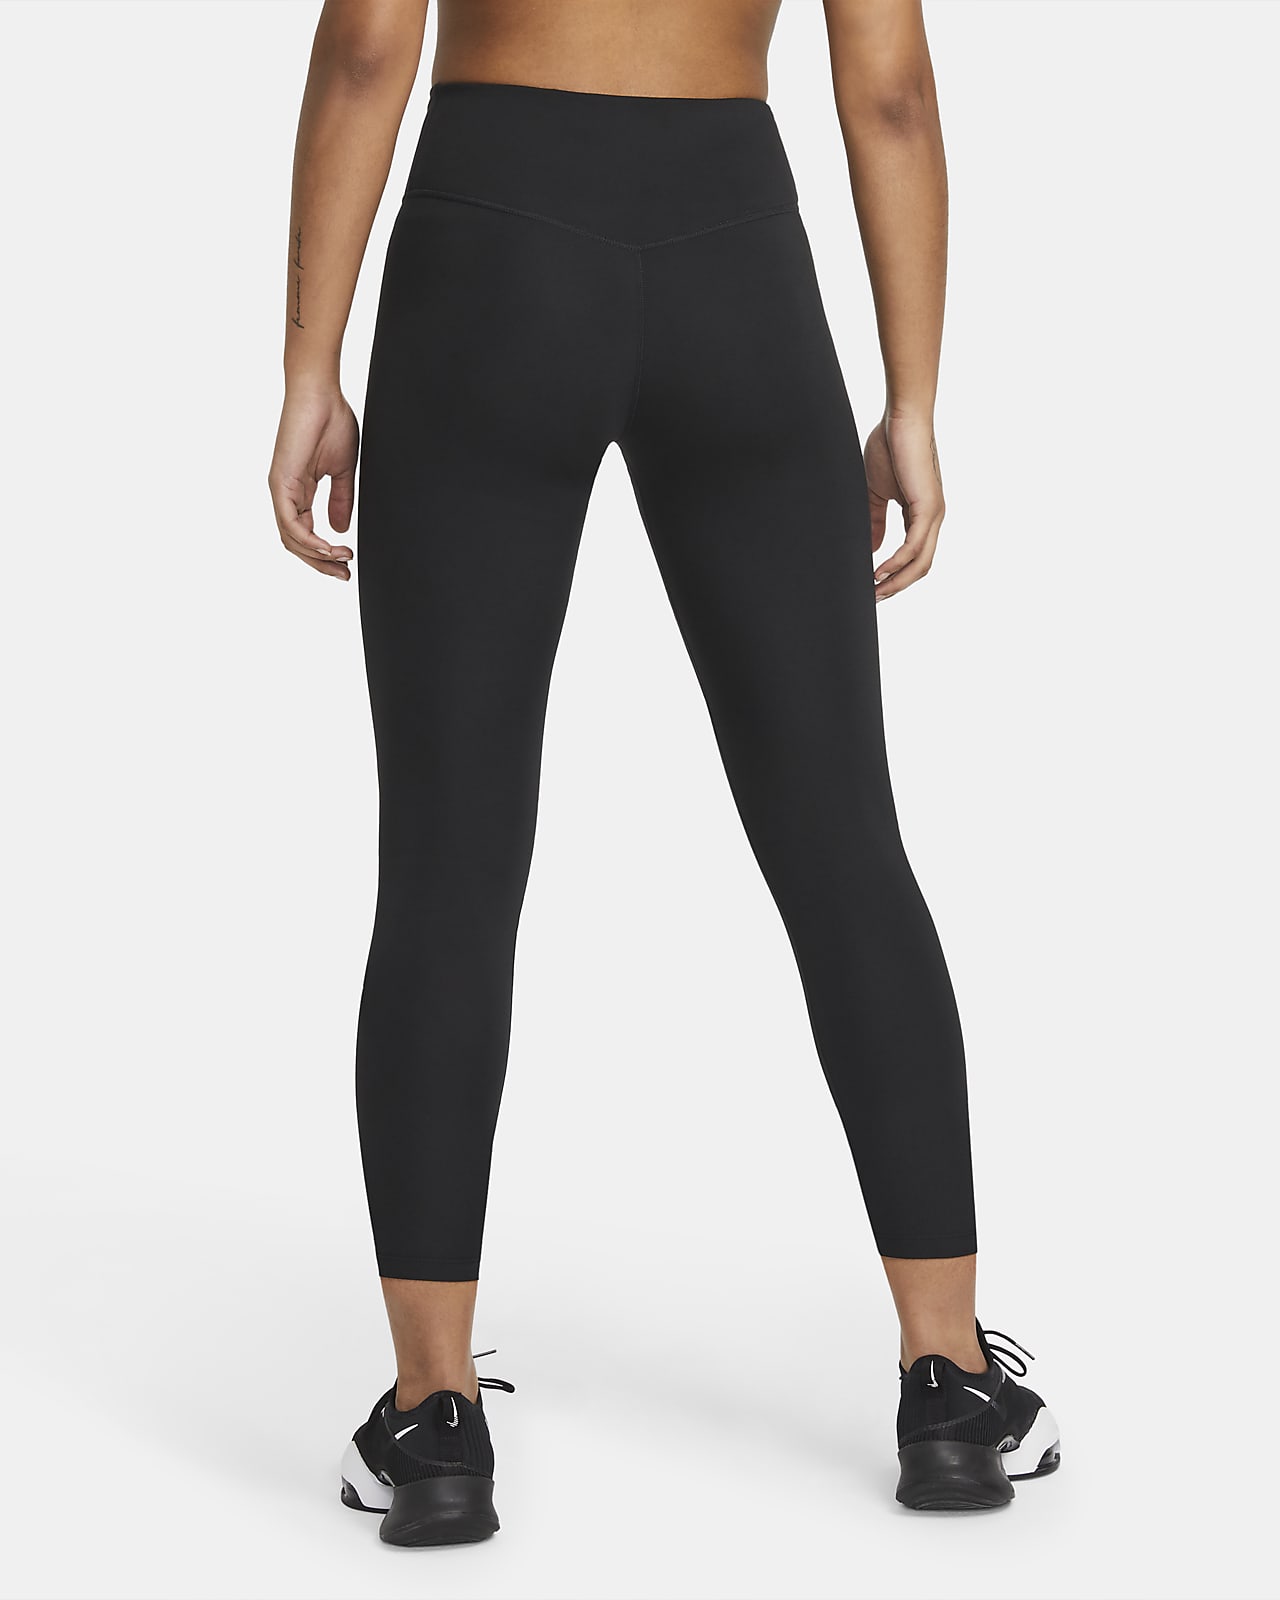 En honor moverse callejón LEGGING Nike One Womens Cropped Tights AA NEGRO